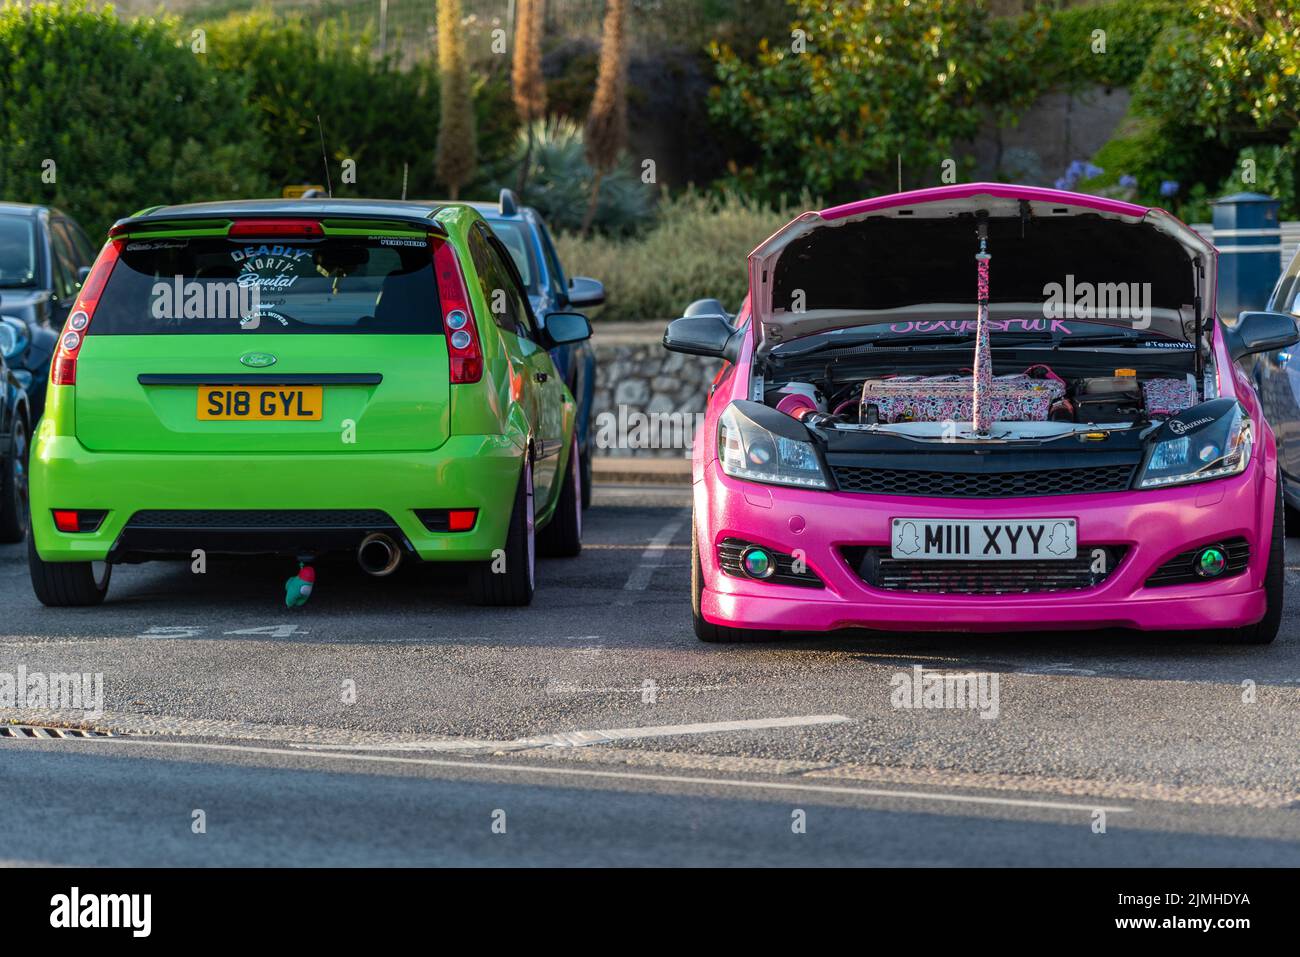 Southend on Sea, Essex, UK. 6th Aug, 2022. The sunny weather has brought people to the seaside resort, with youngsters gathering for a car meet in the evening. Brightly coloured cars on display Stock Photo